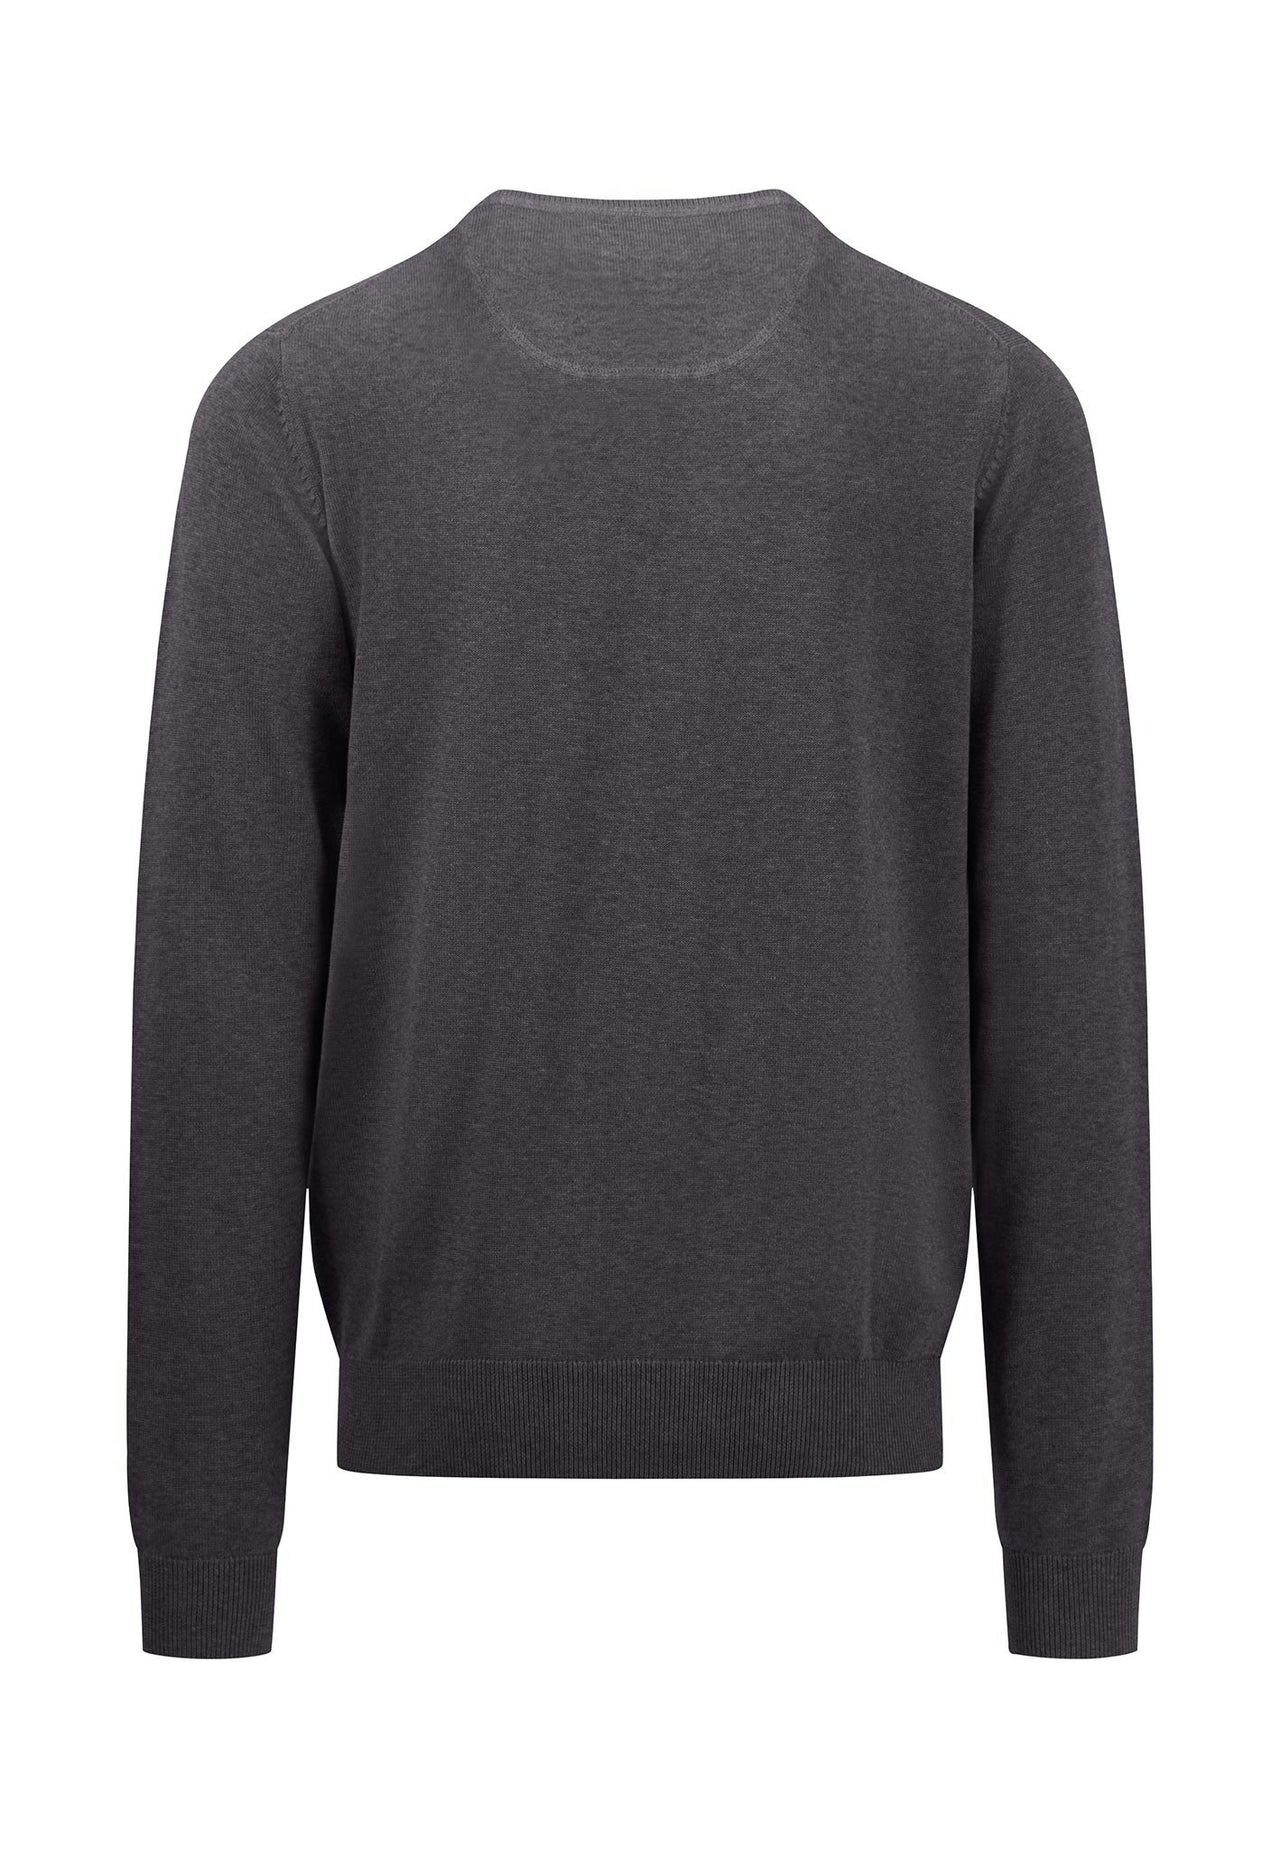 Fynch Casual O-Neck - Charcoal